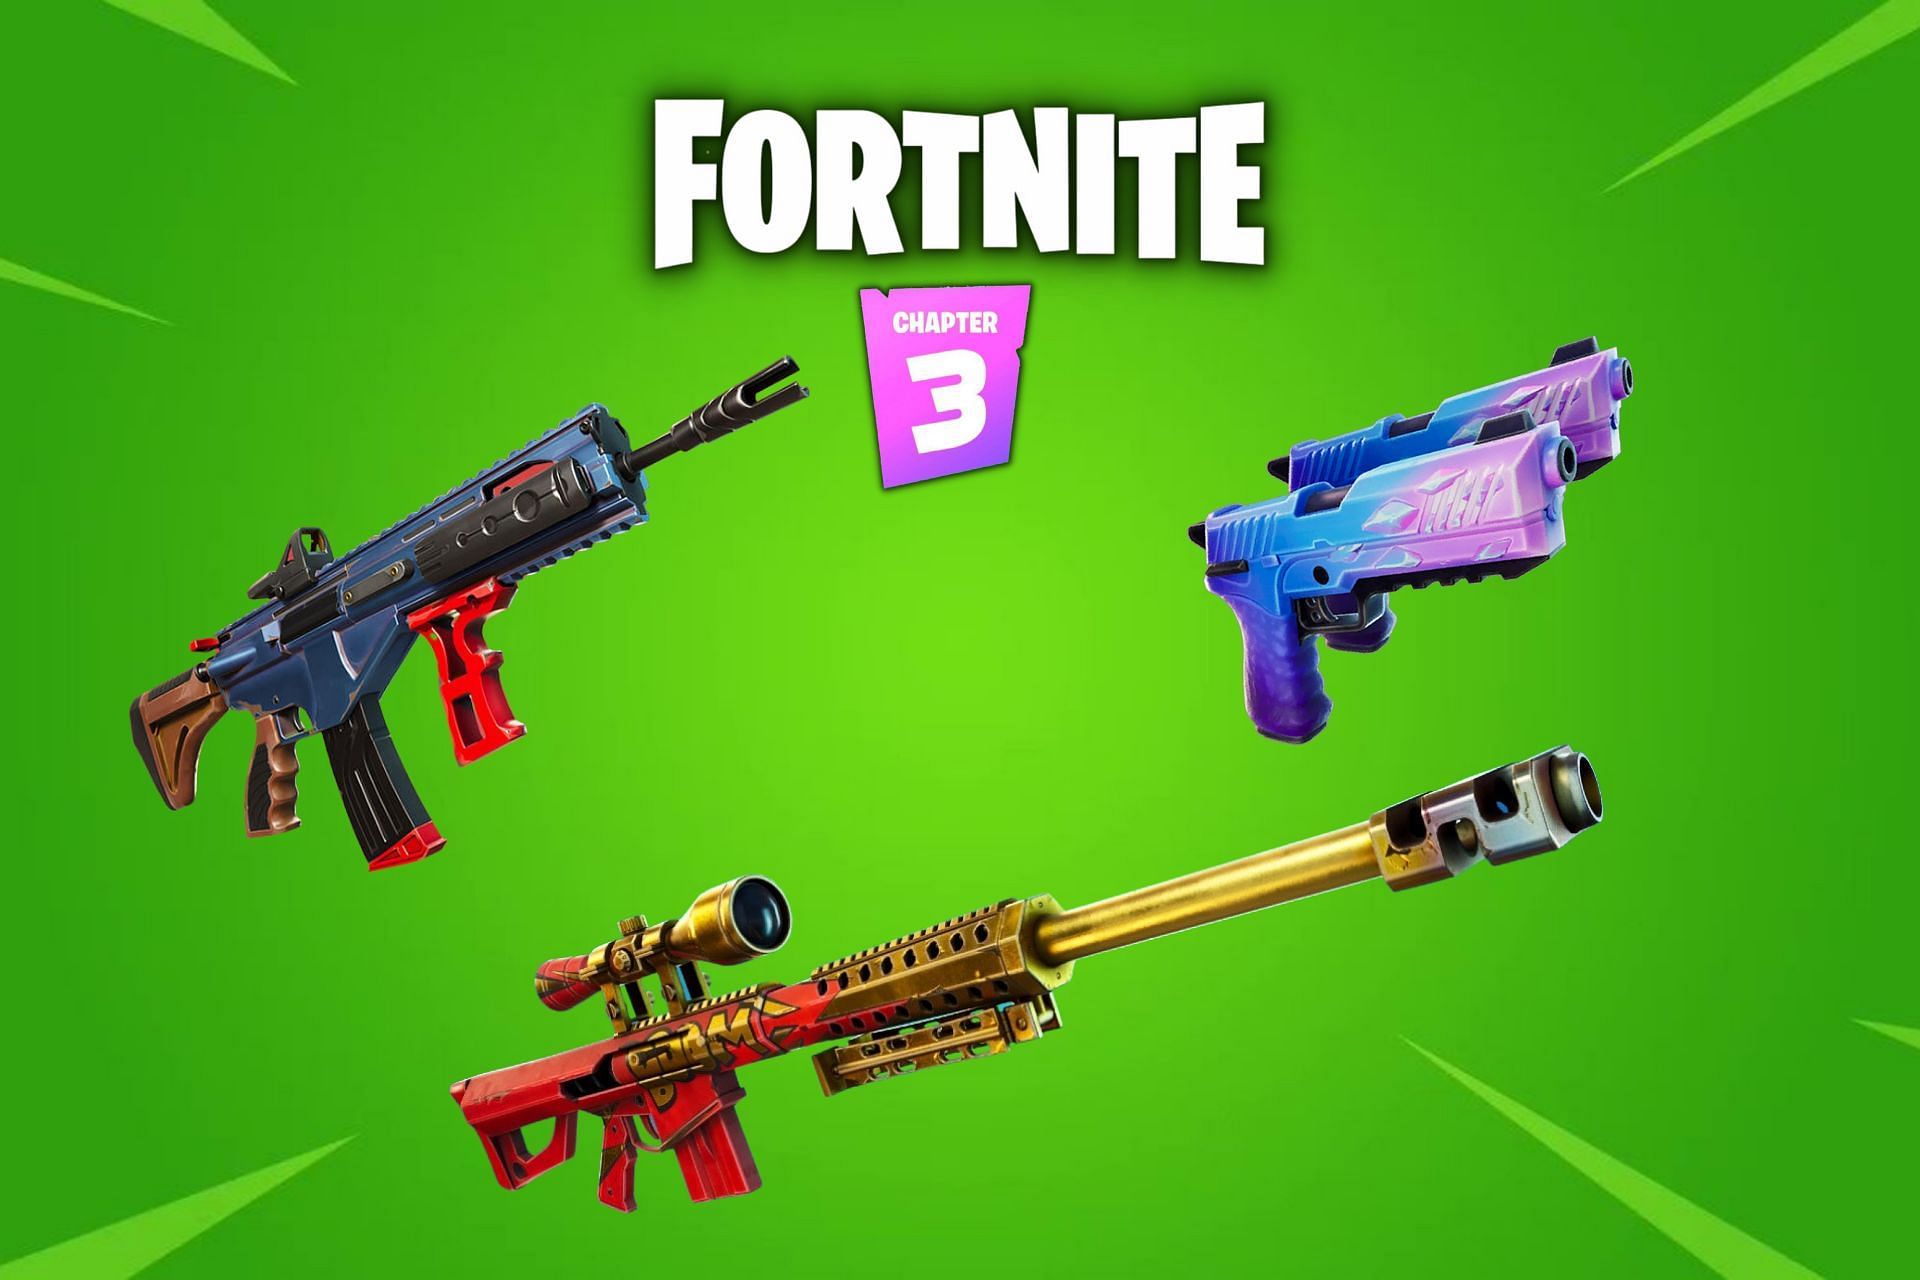 Location of all Mythics and Exotic weapons in Fortnite Chapter 3 Season 1 (Image via Sportskeeda)